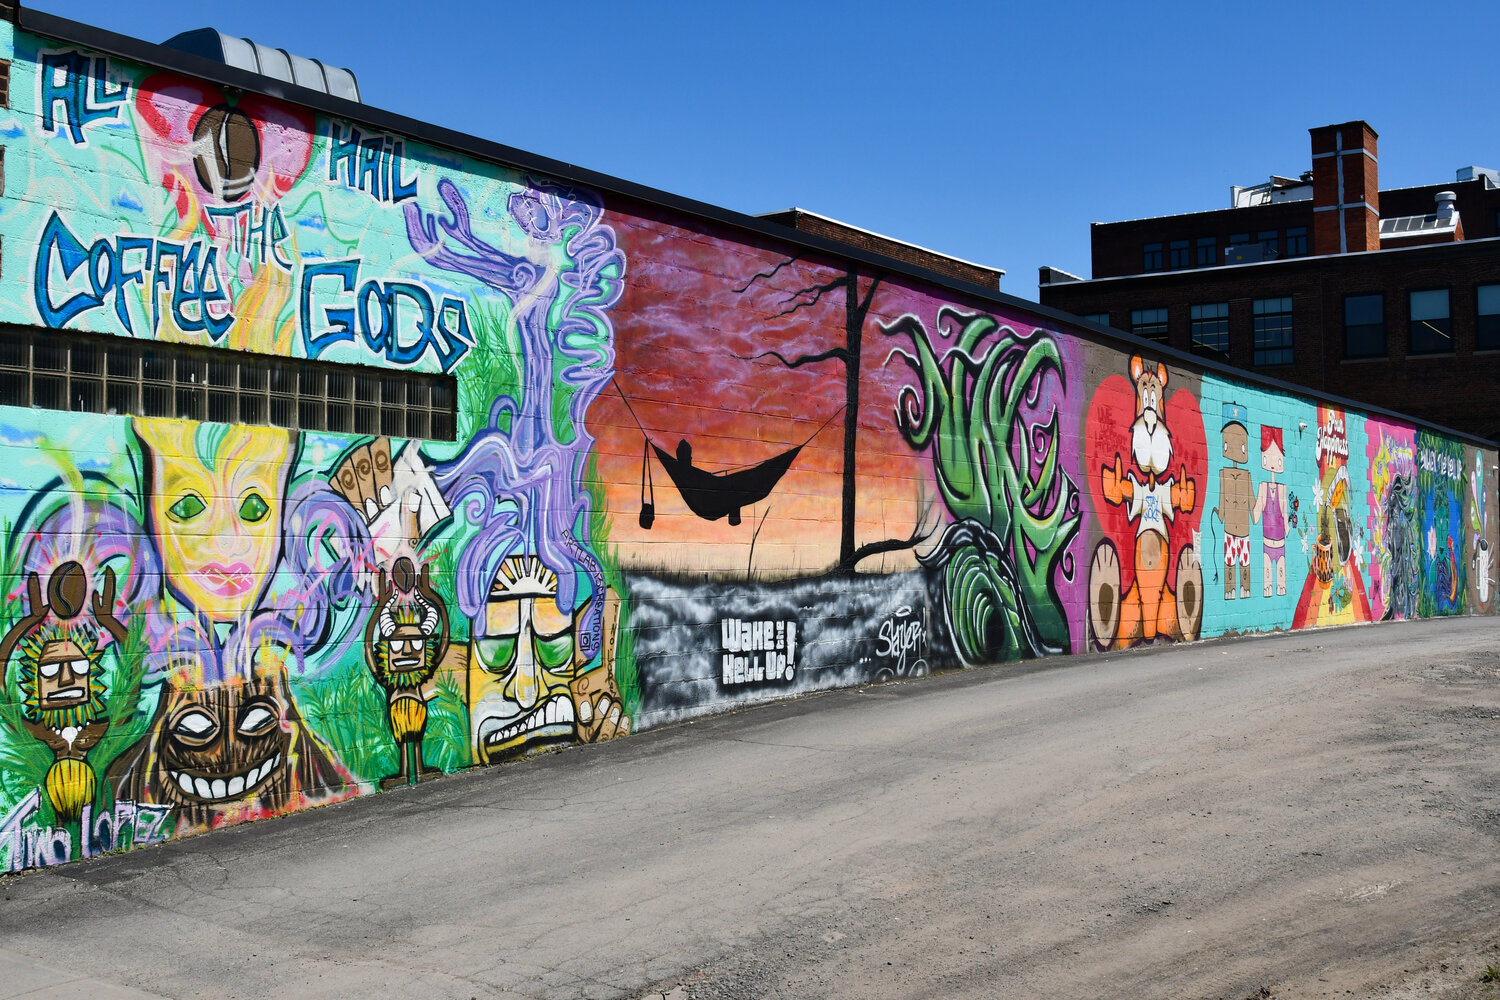 The Utica Coffee Roasting mural wall, located directly across from Utica Coffee Roasting at 92 Genesee St. is one of the 13 murals that can be found on the Oneida County Mural Trail.